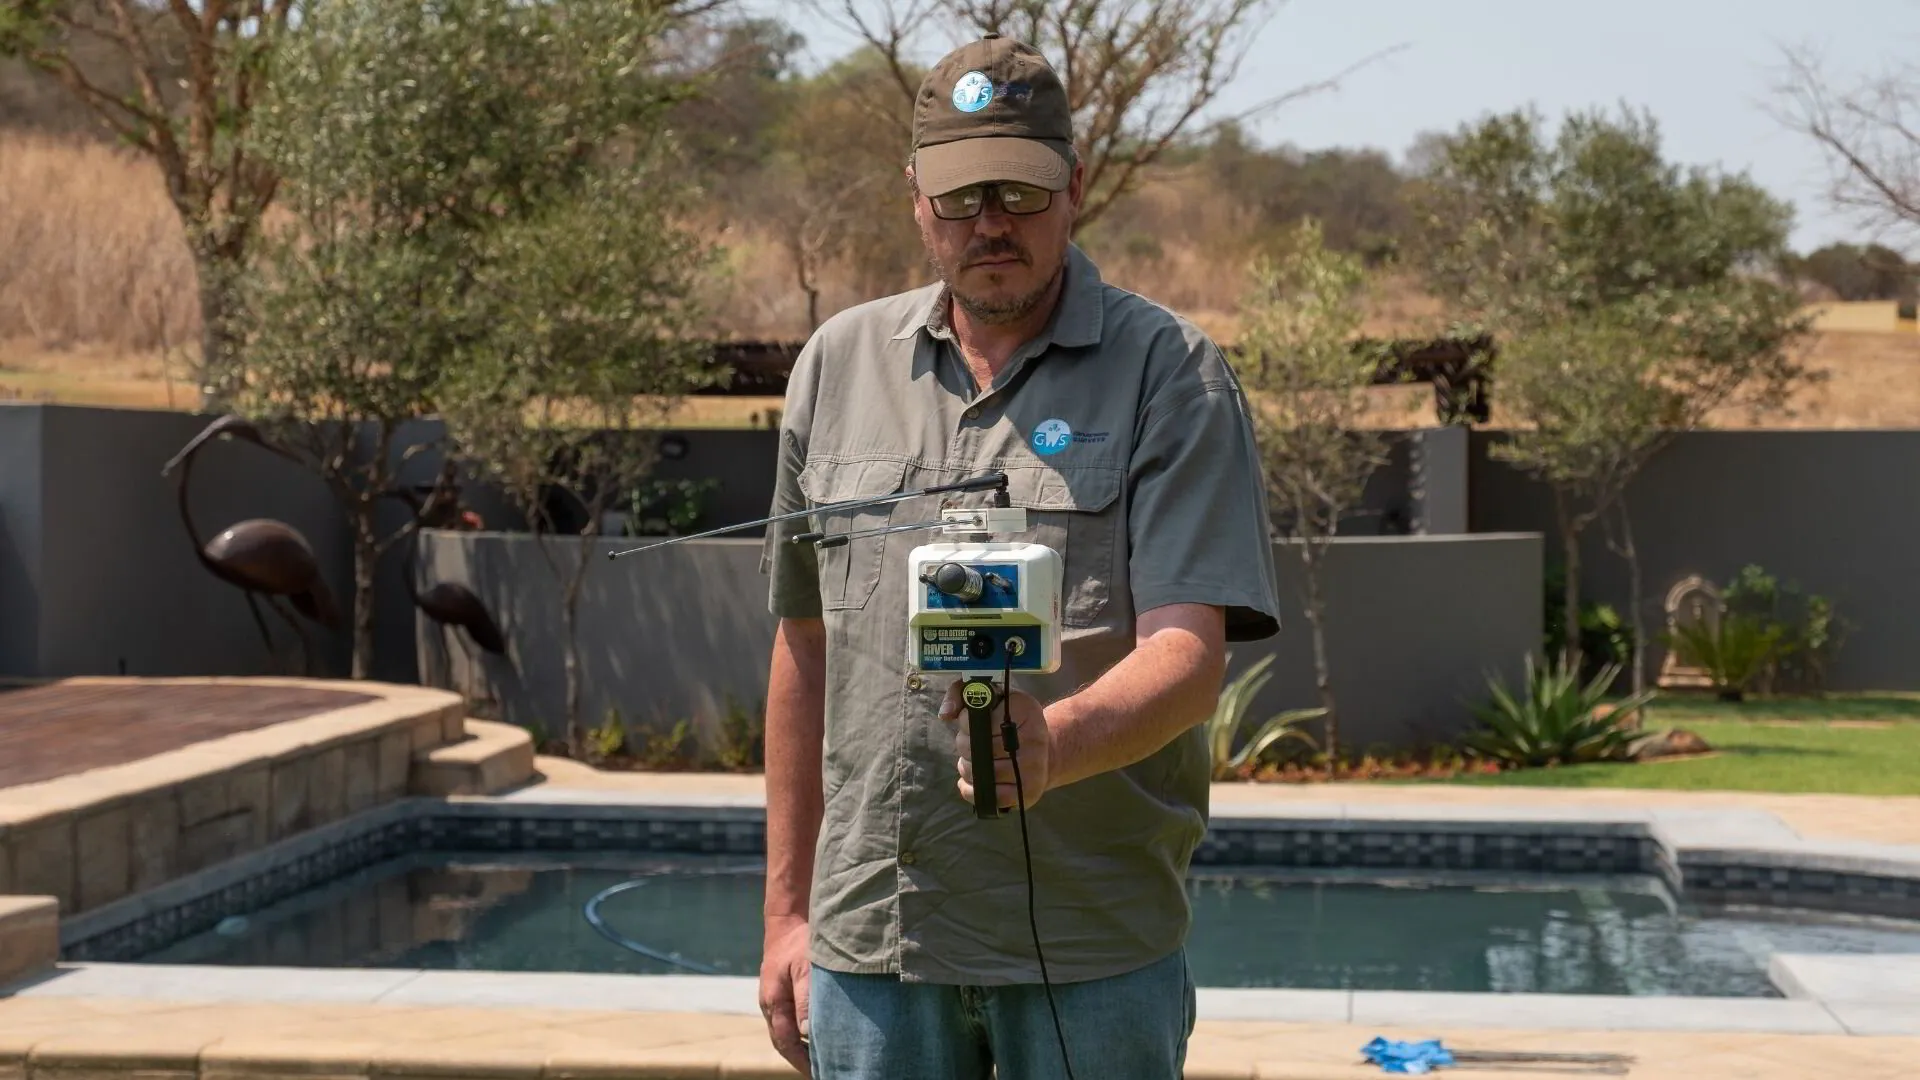 GWS- Man with River F Plus water detector device in action